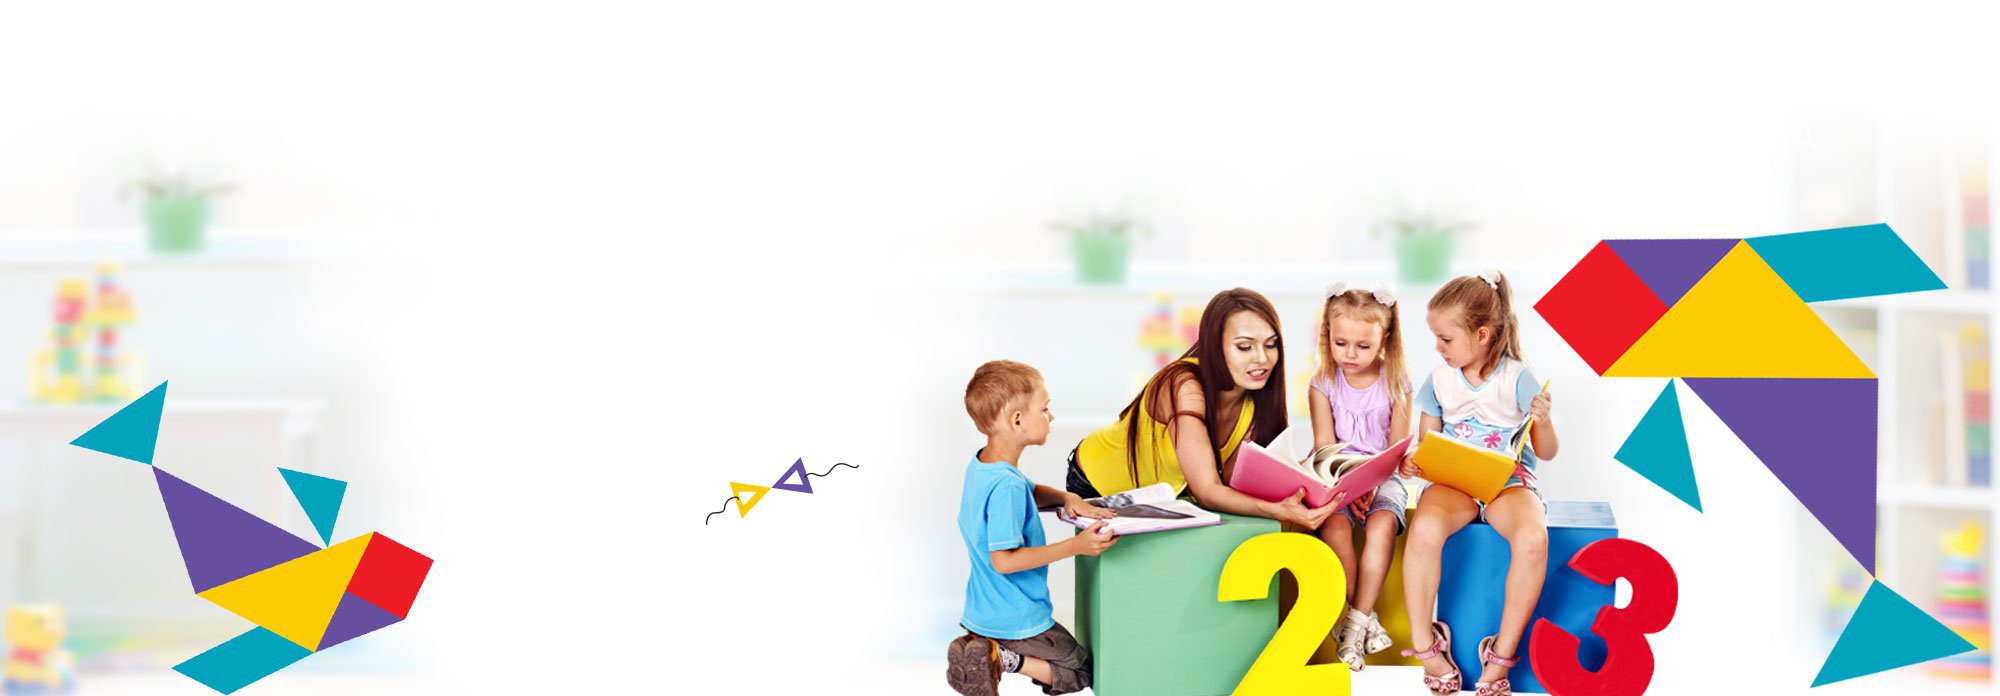 i-Maths_Education_Franchise_Opportunities_in_Canada_1